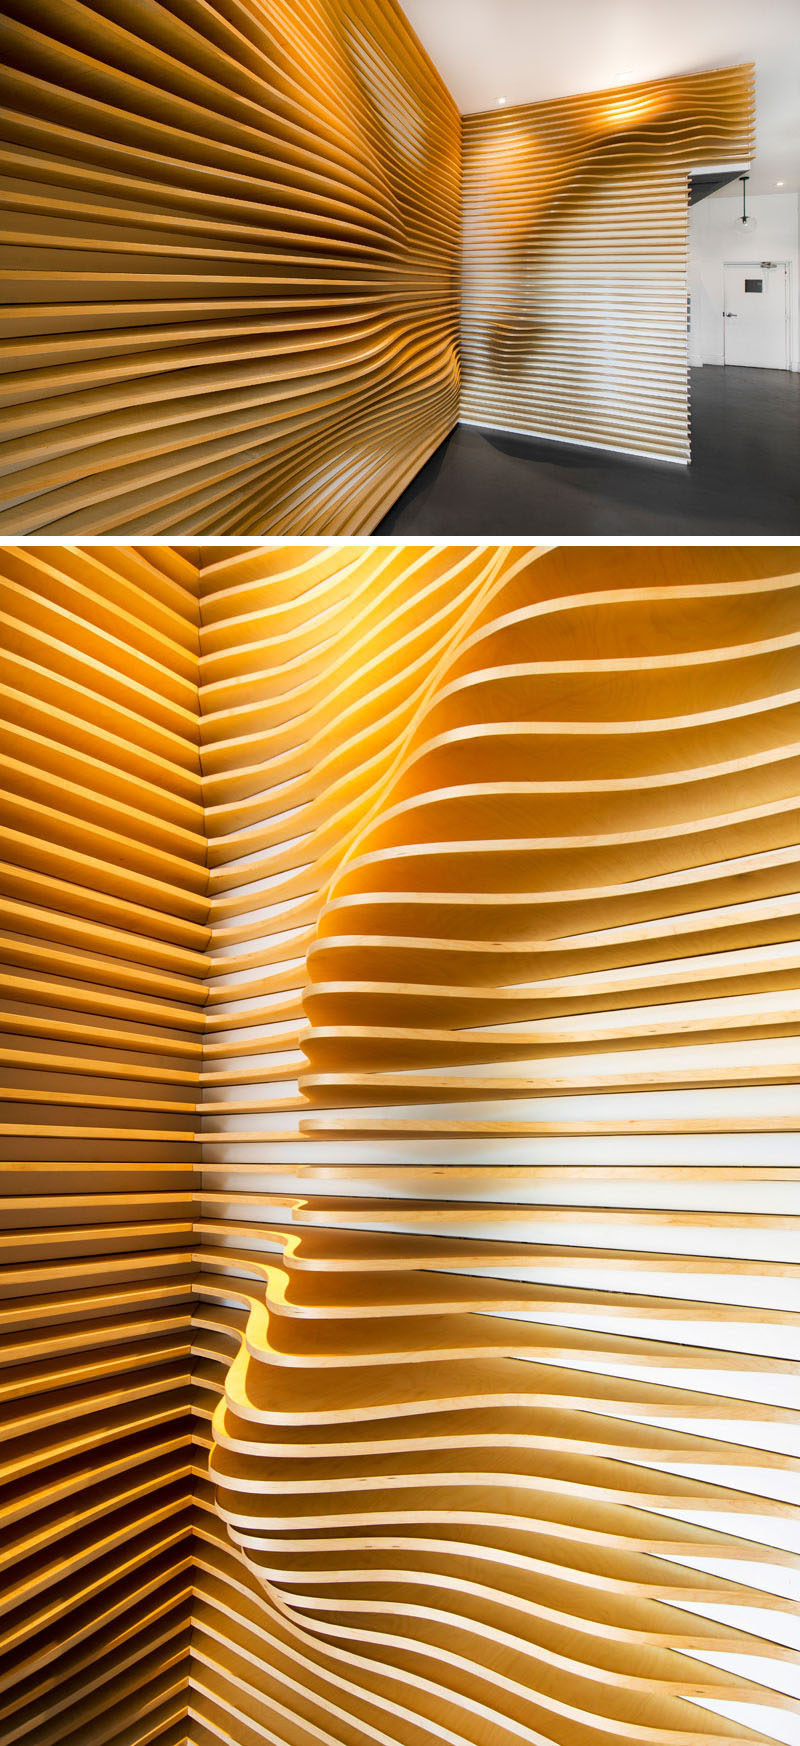 Baran Studio have designed a sculptural accent wall, made from CNC cut plywood, for the lobby of a building in California. #WoodAccentWall #WoodWall #AccentWall #OfficeDesign